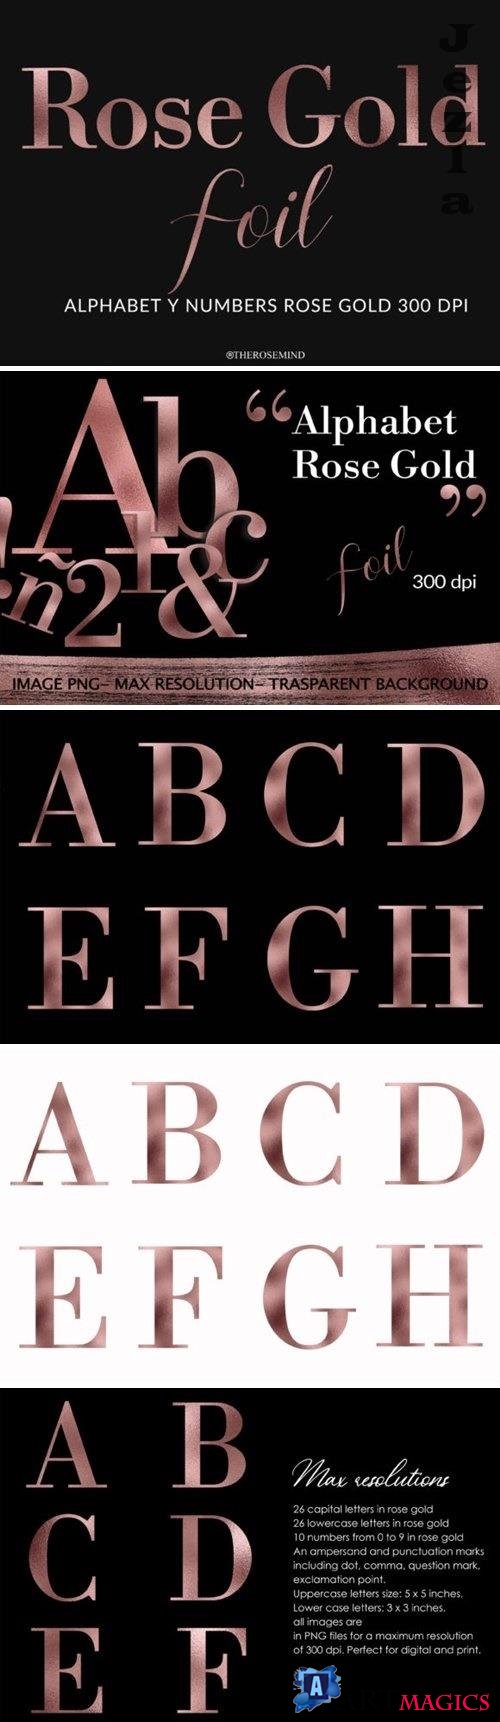 Alphabet and Numbers Rose Gold Foil Graphic